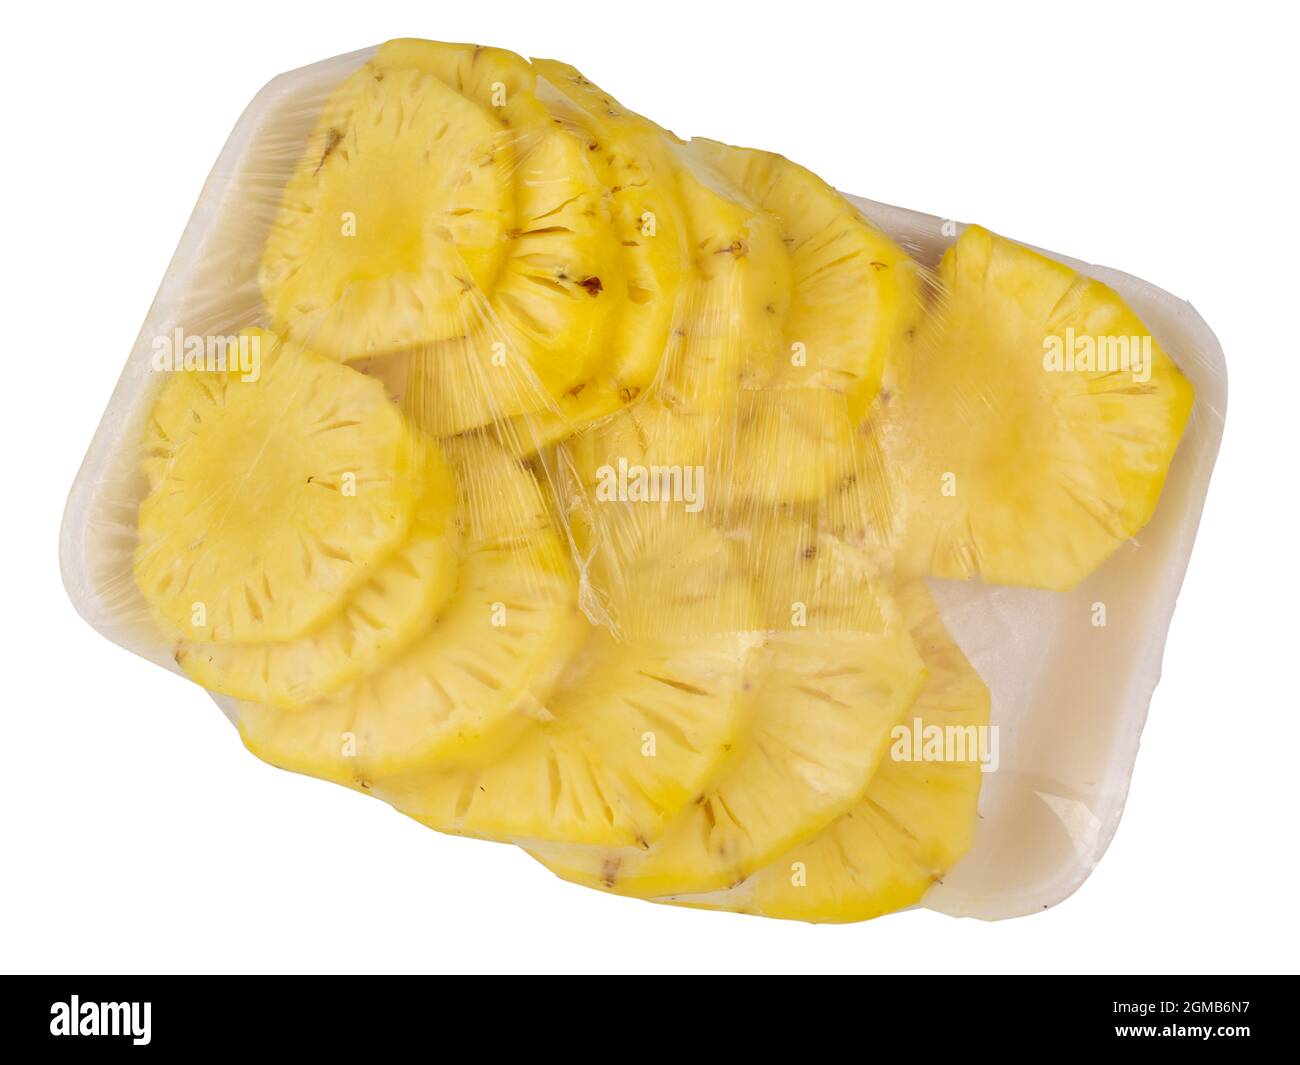 https://c8.alamy.com/comp/2GMB6N7/pineapple-in-foam-plate-in-hand-isolated-on-white-background-top-view-2GMB6N7.jpg